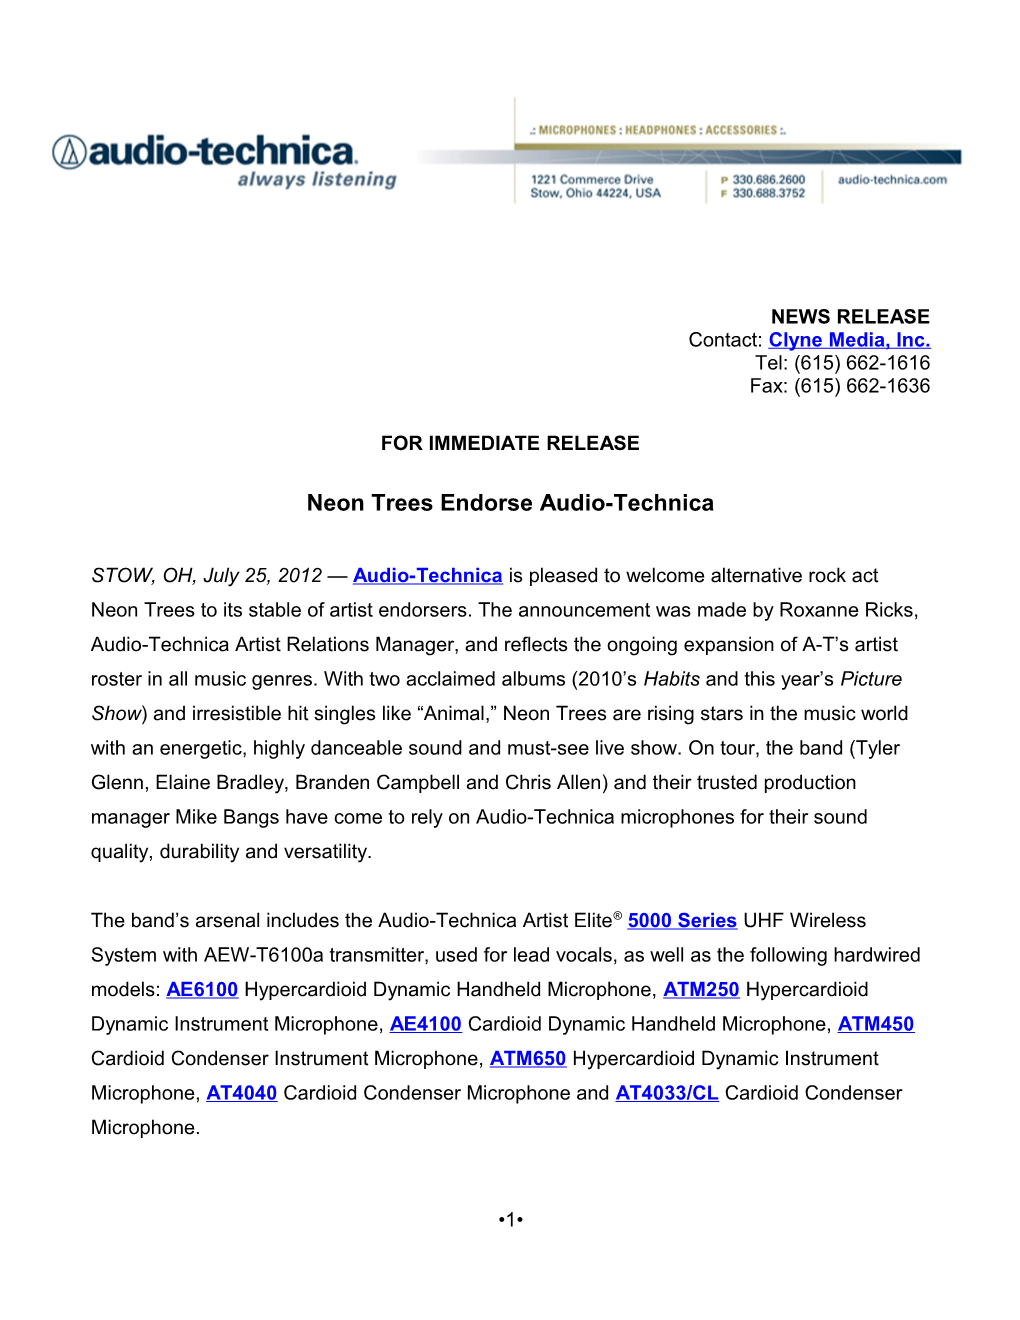 Solid Bass Press Release for CEA Line Shows 2011